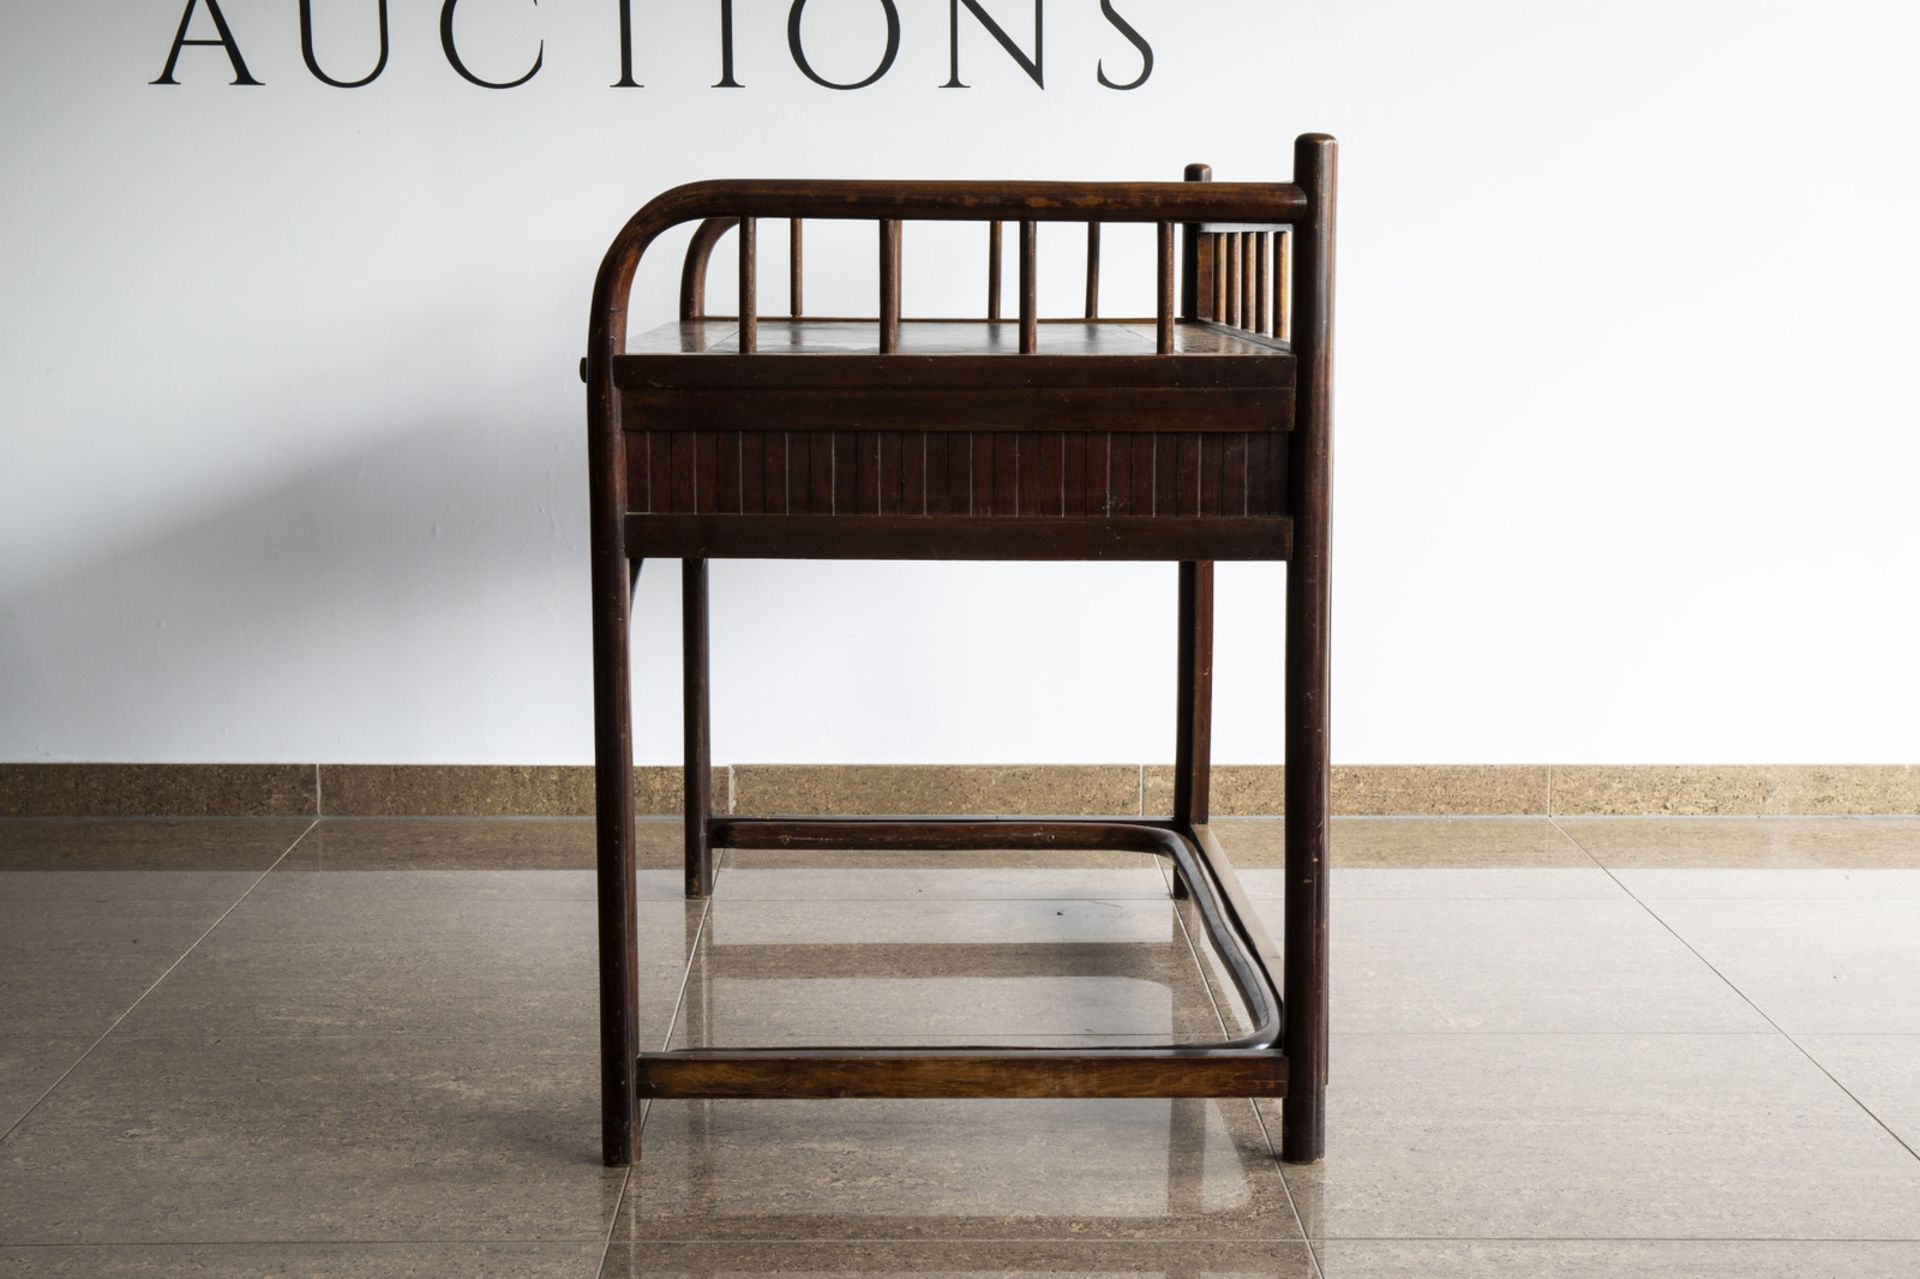 Attributed to Josef Hoffmann (1870-1956): A bentwood writing desk, Austria, beginning of the 20th C. - Image 6 of 12